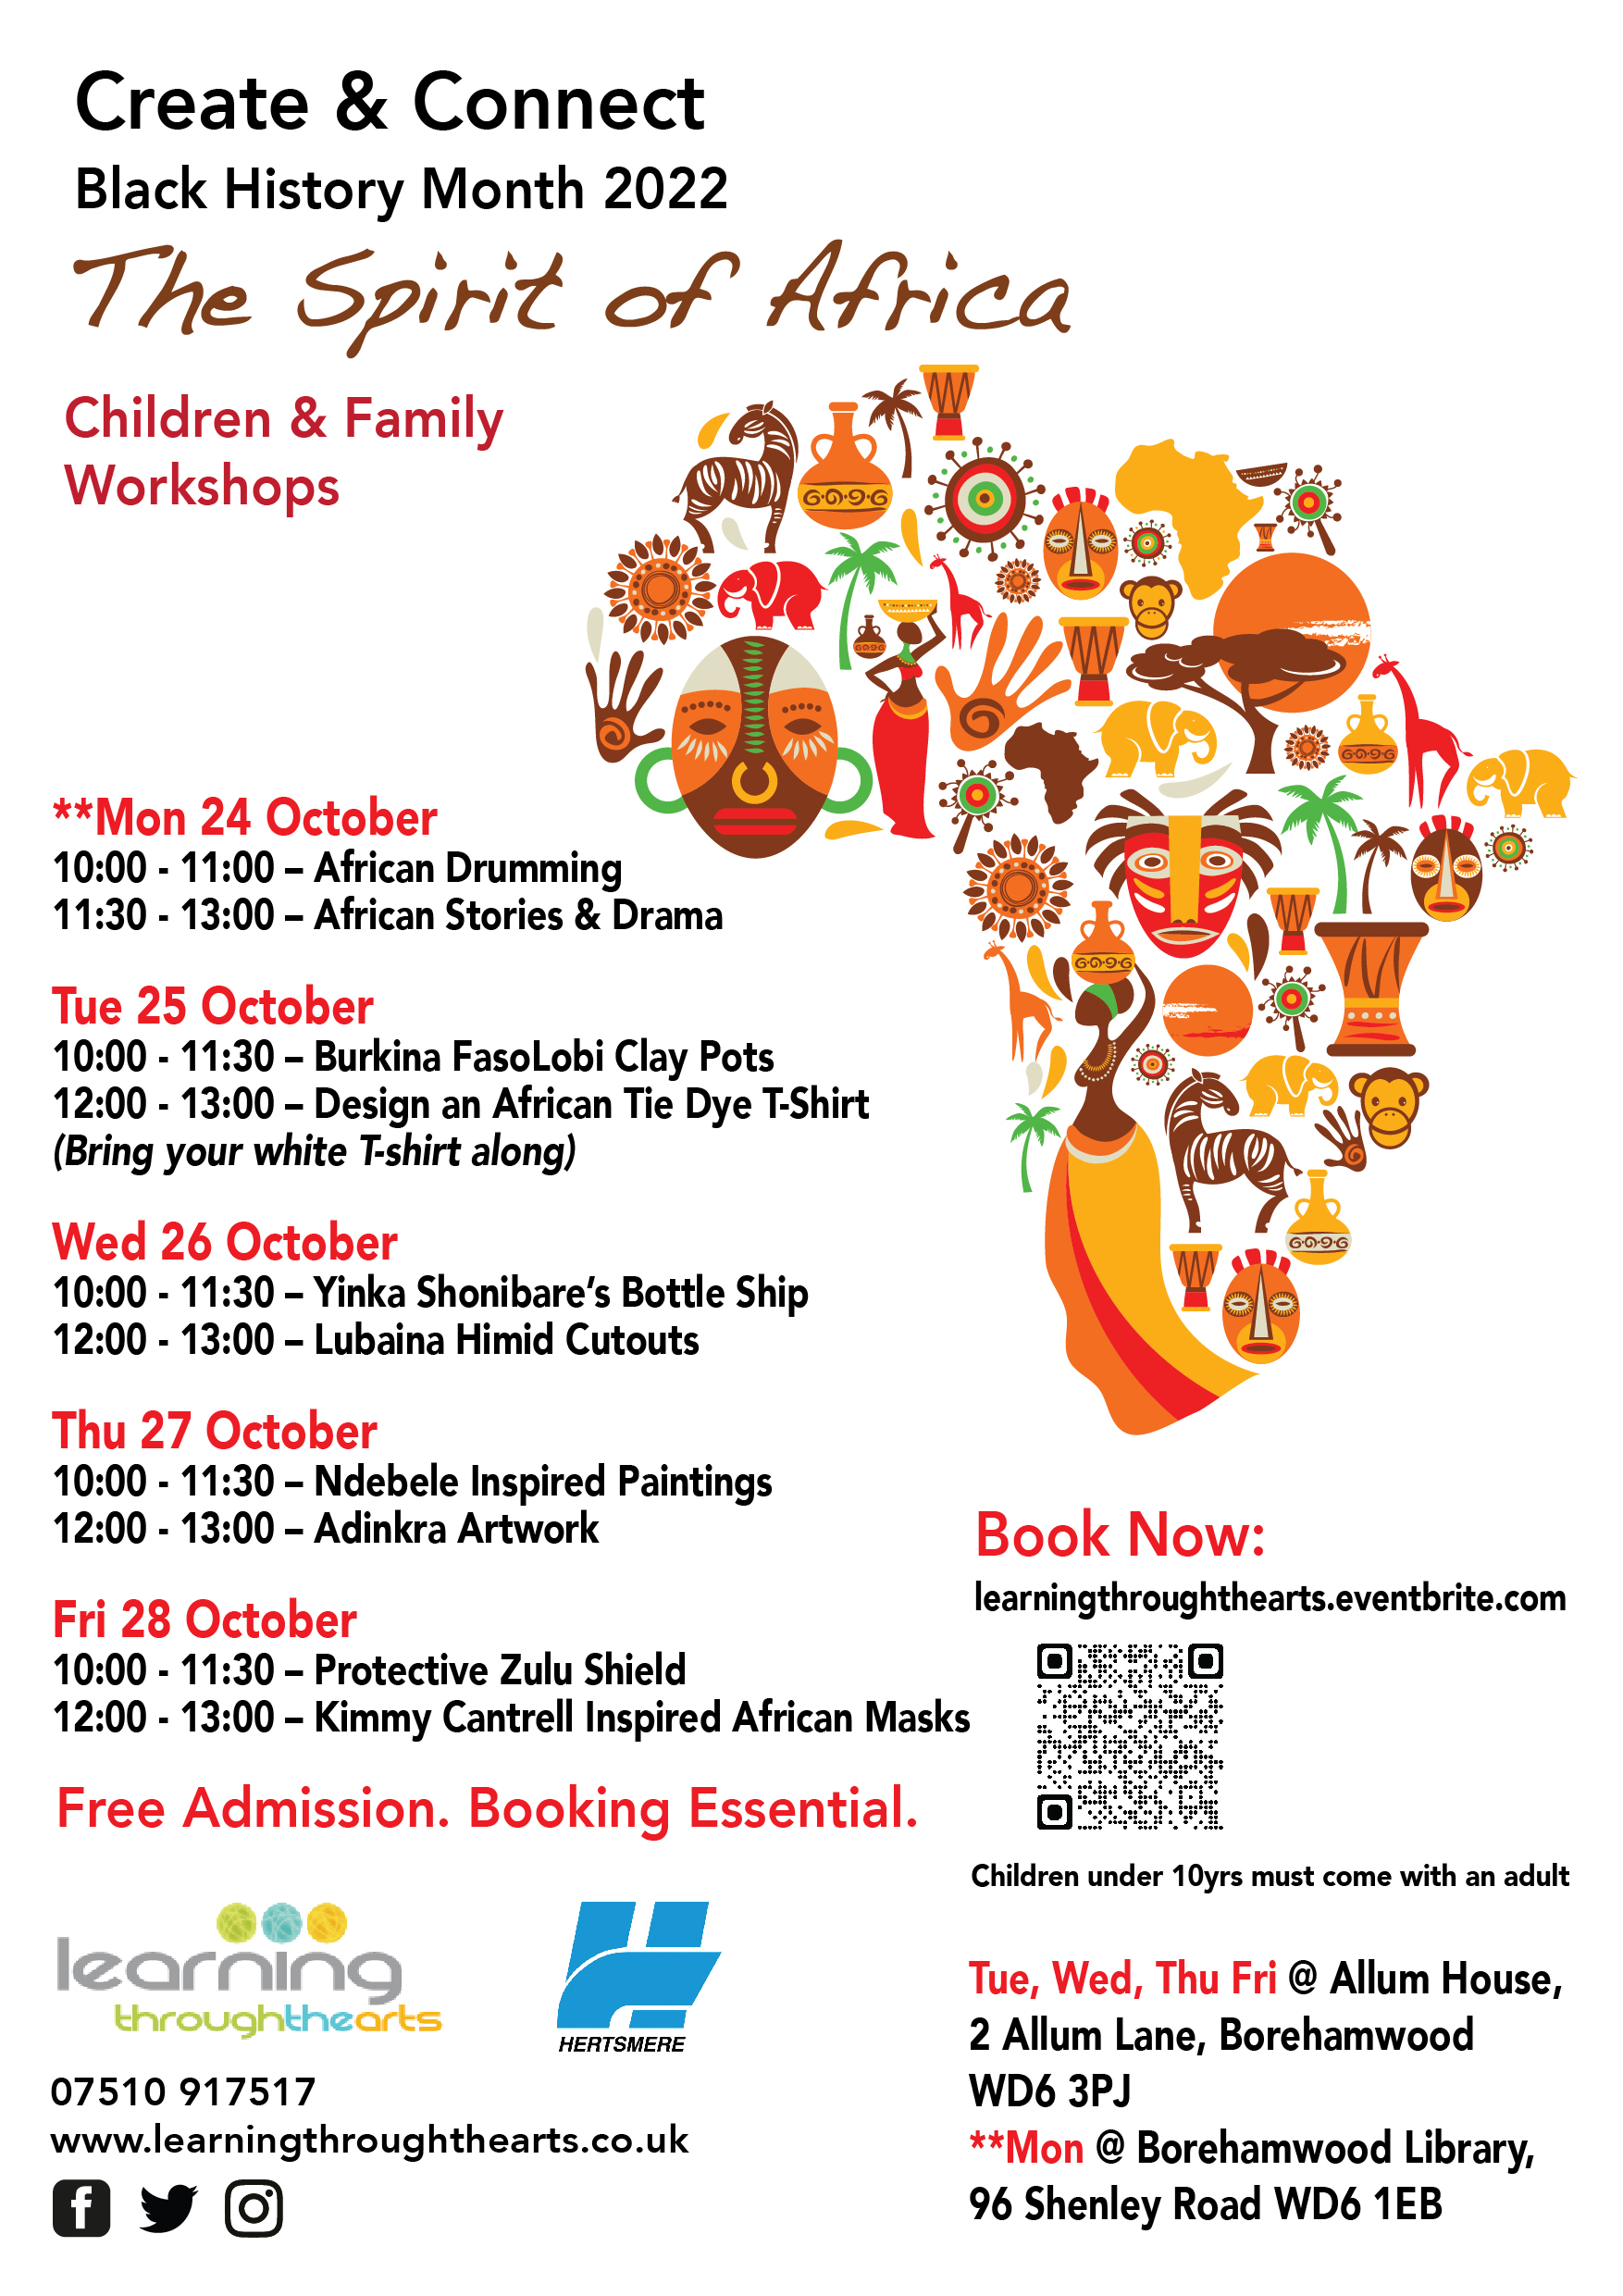 Create And Connect - The Spirit of Africa: Black History Month Workshops for children